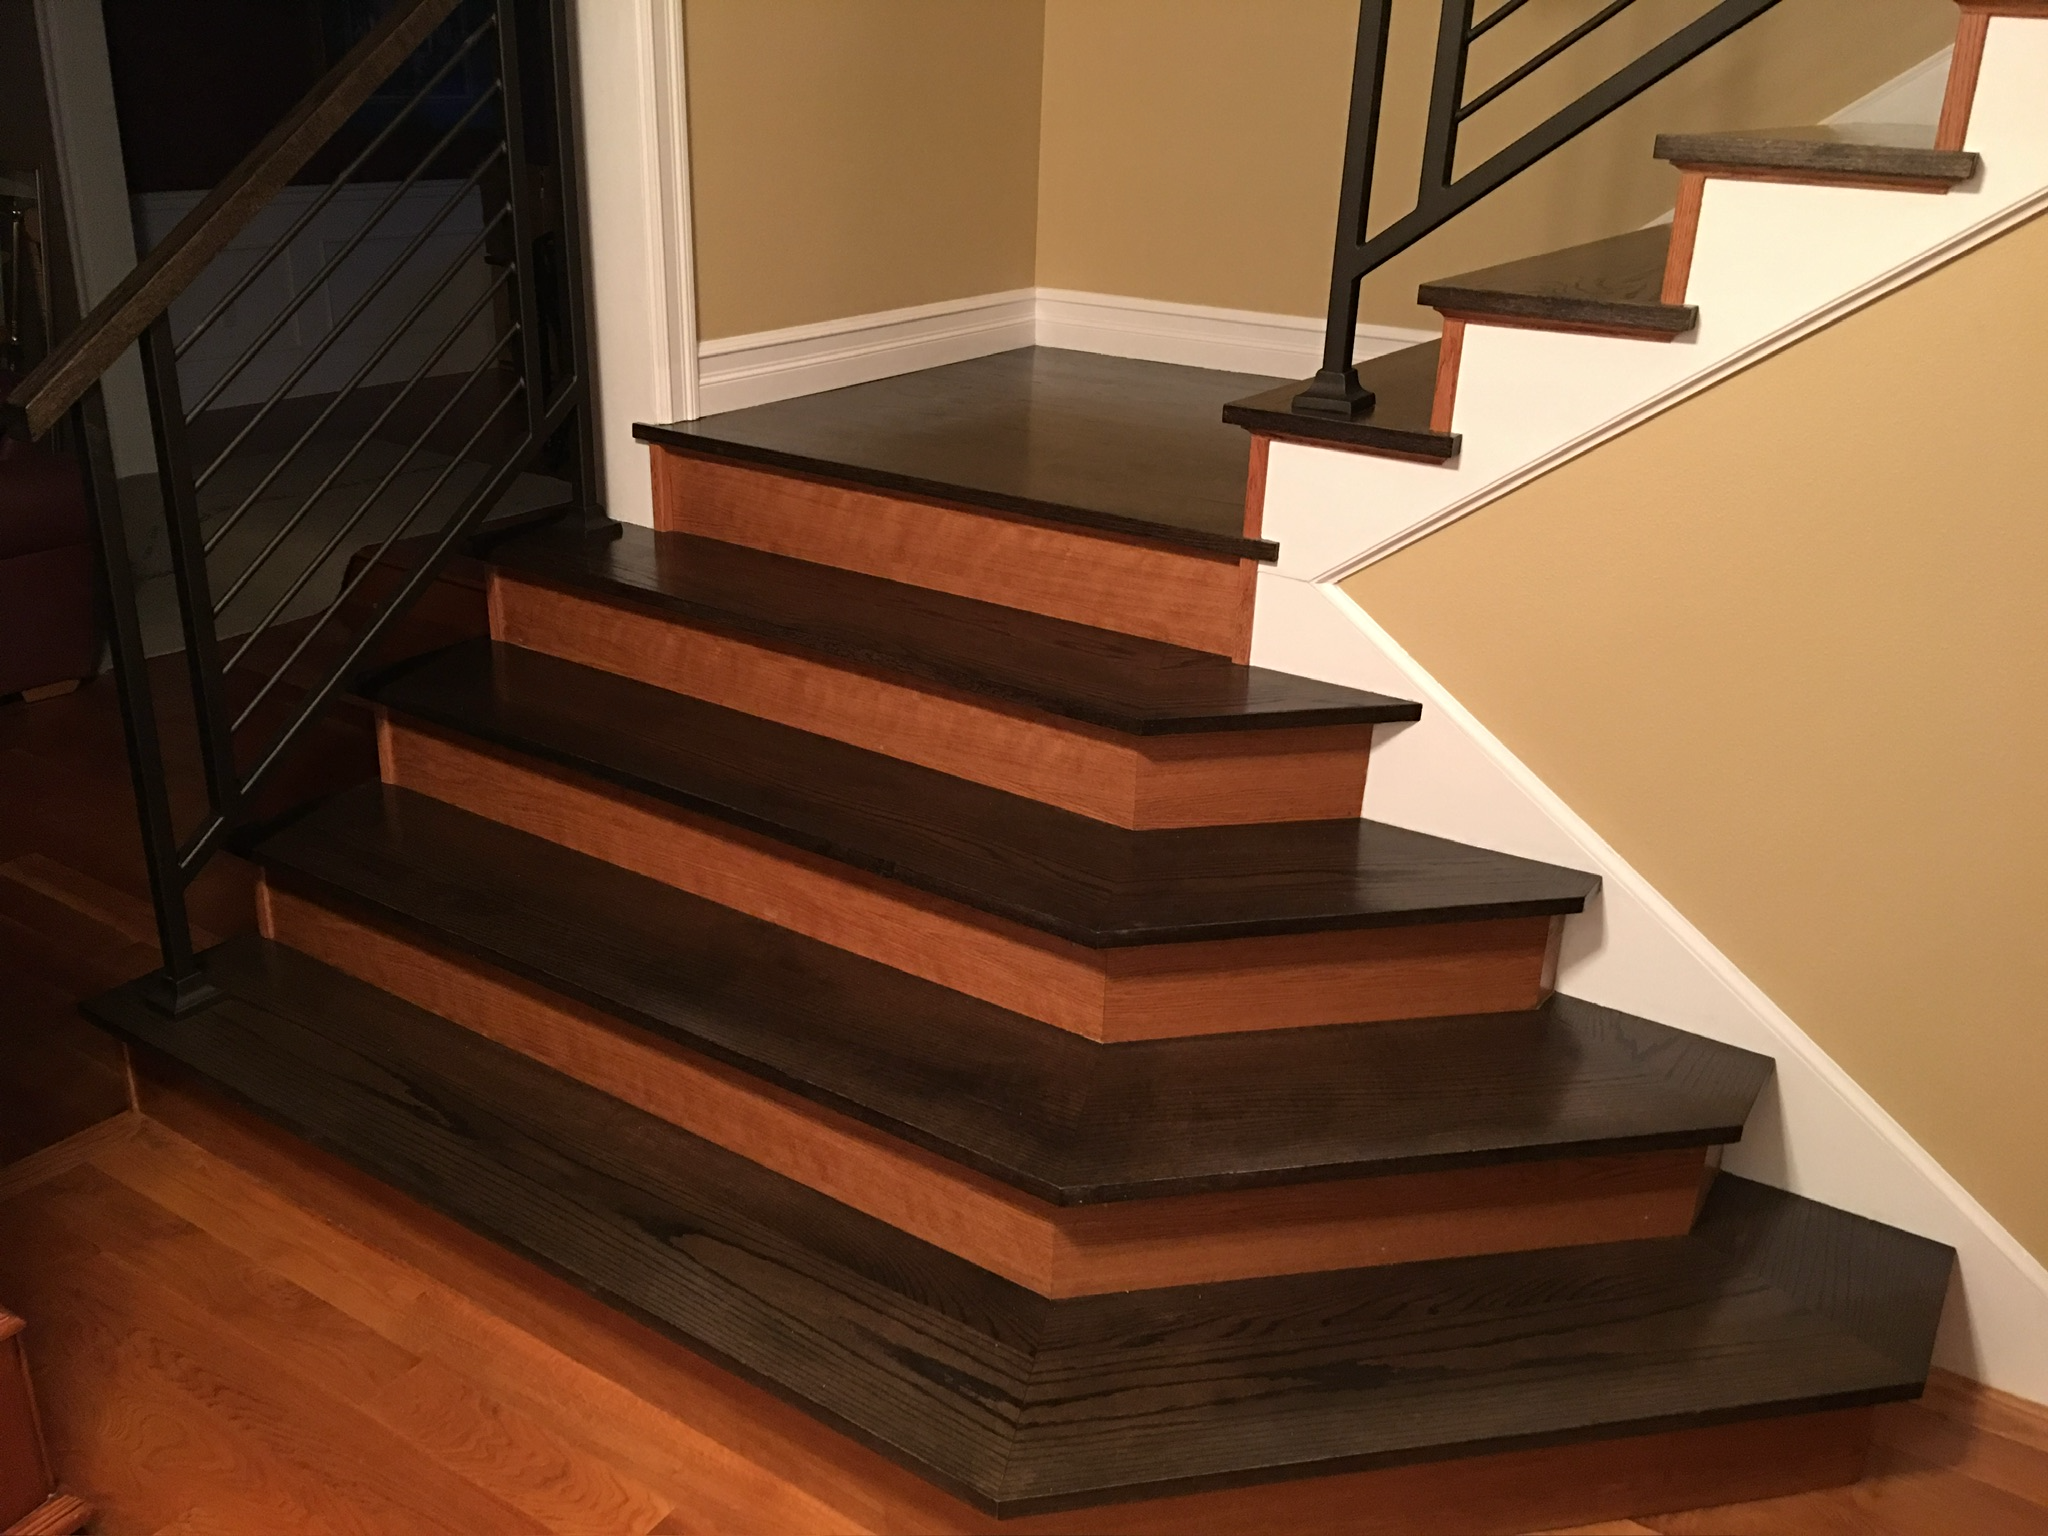 You are currently viewing Crafting the Wallace Family’s Craftsman Stairs